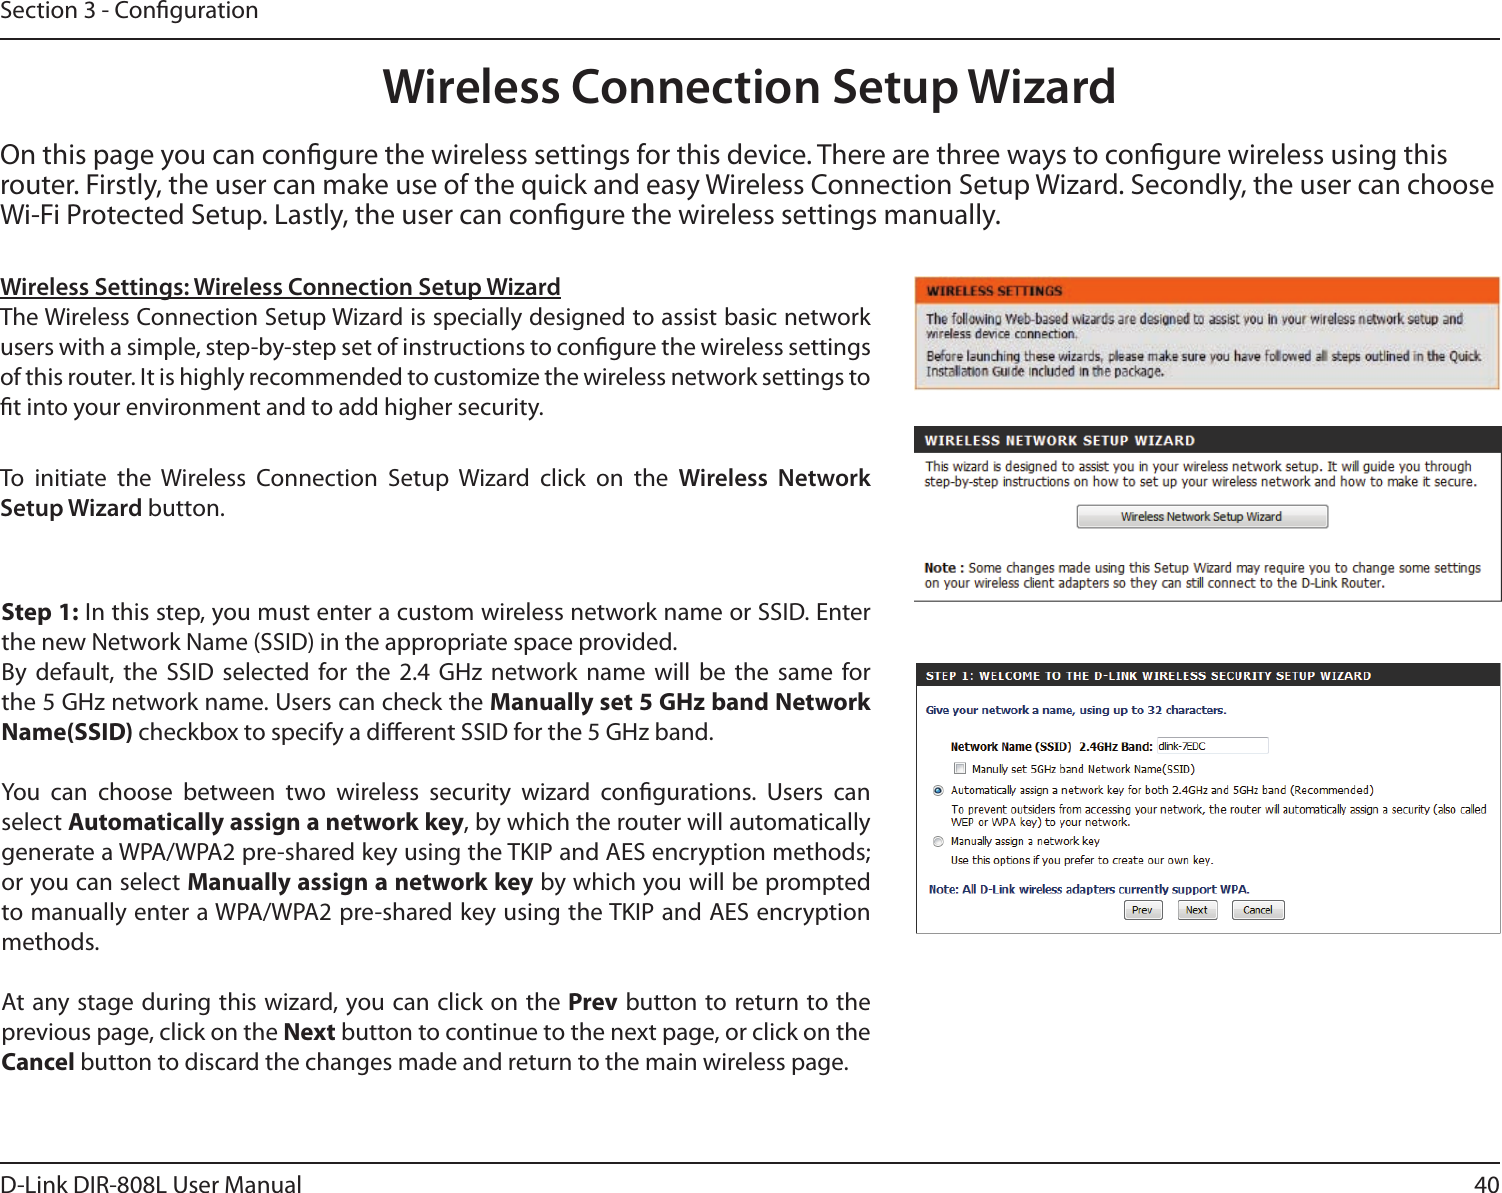 40D-Link DIR-808L User ManualSection 3 - CongurationOn this page you can congure the wireless settings for this device. There are three ways to congure wireless using this router. Firstly, the user can make use of the quick and easy Wireless Connection Setup Wizard. Secondly, the user can choose Wi-Fi Protected Setup. Lastly, the user can congure the wireless settings manually.Wireless Settings: Wireless Connection Setup WizardThe Wireless Connection Setup Wizard is specially designed to assist basic network  users with a simple, step-by-step set of instructions to congure the wireless settings of this router. It is highly recommended to customize the wireless network settings to t into your environment and to add higher security.Step 1: In this step, you must enter a custom wireless network name or SSID. Enter the new Network Name (SSID) in the appropriate space provided. By  default,  the  SSID  selected  for  the  2.4  GHz network  name  will  be  the  same  for the 5 GHz network name. Users can check the Manually set 5 GHz band Network Name(SSID) checkbox to specify a dierent SSID for the 5 GHz band.You  can  choose  between  two  wireless  security  wizard  congurations.  Users  can  select Automatically assign a network key, by which the router will automatically generate a WPA/WPA2 pre-shared key using the TKIP and AES encryption methods; or you can select Manually assign a network key by which you will be prompted to manually enter a WPA/WPA2 pre-shared key using the TKIP and AES encryption  methods.At any stage during this wizard, you can click on the Prev button to return to the previous page, click on the Next button to continue to the next page, or click on the Cancel button to discard the changes made and return to the main wireless page.To  initiate  the  Wireless  Connection  Setup  Wizard click  on  the  Wireless  Network Setup Wizard button.Wireless Connection Setup Wizard